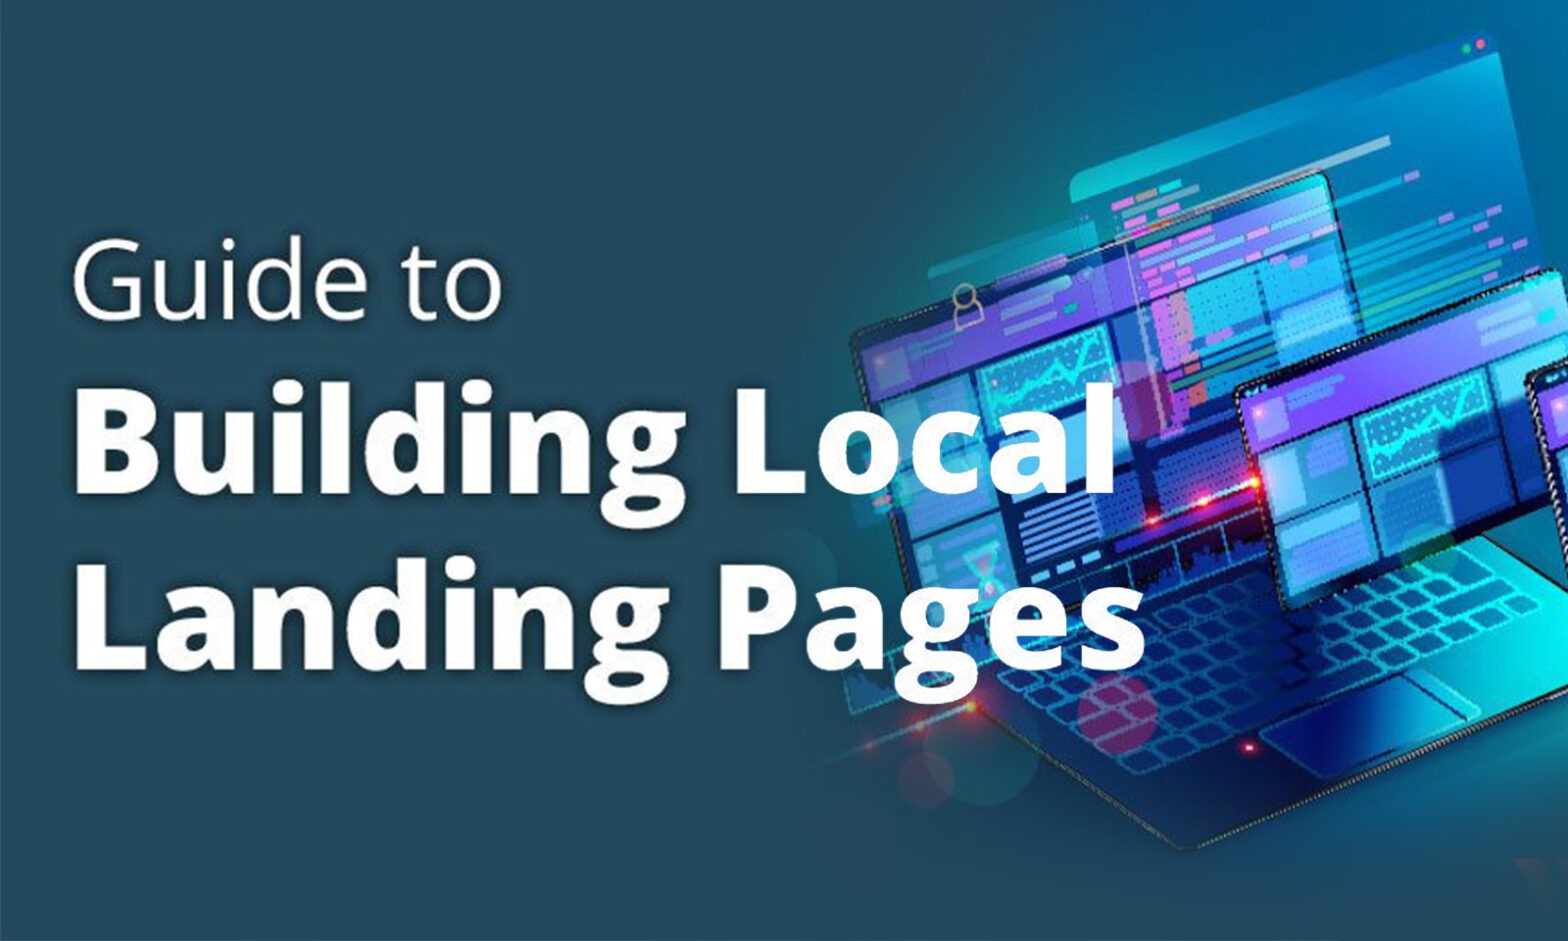 Featured image for post: Guide to Building Local Landing Pages